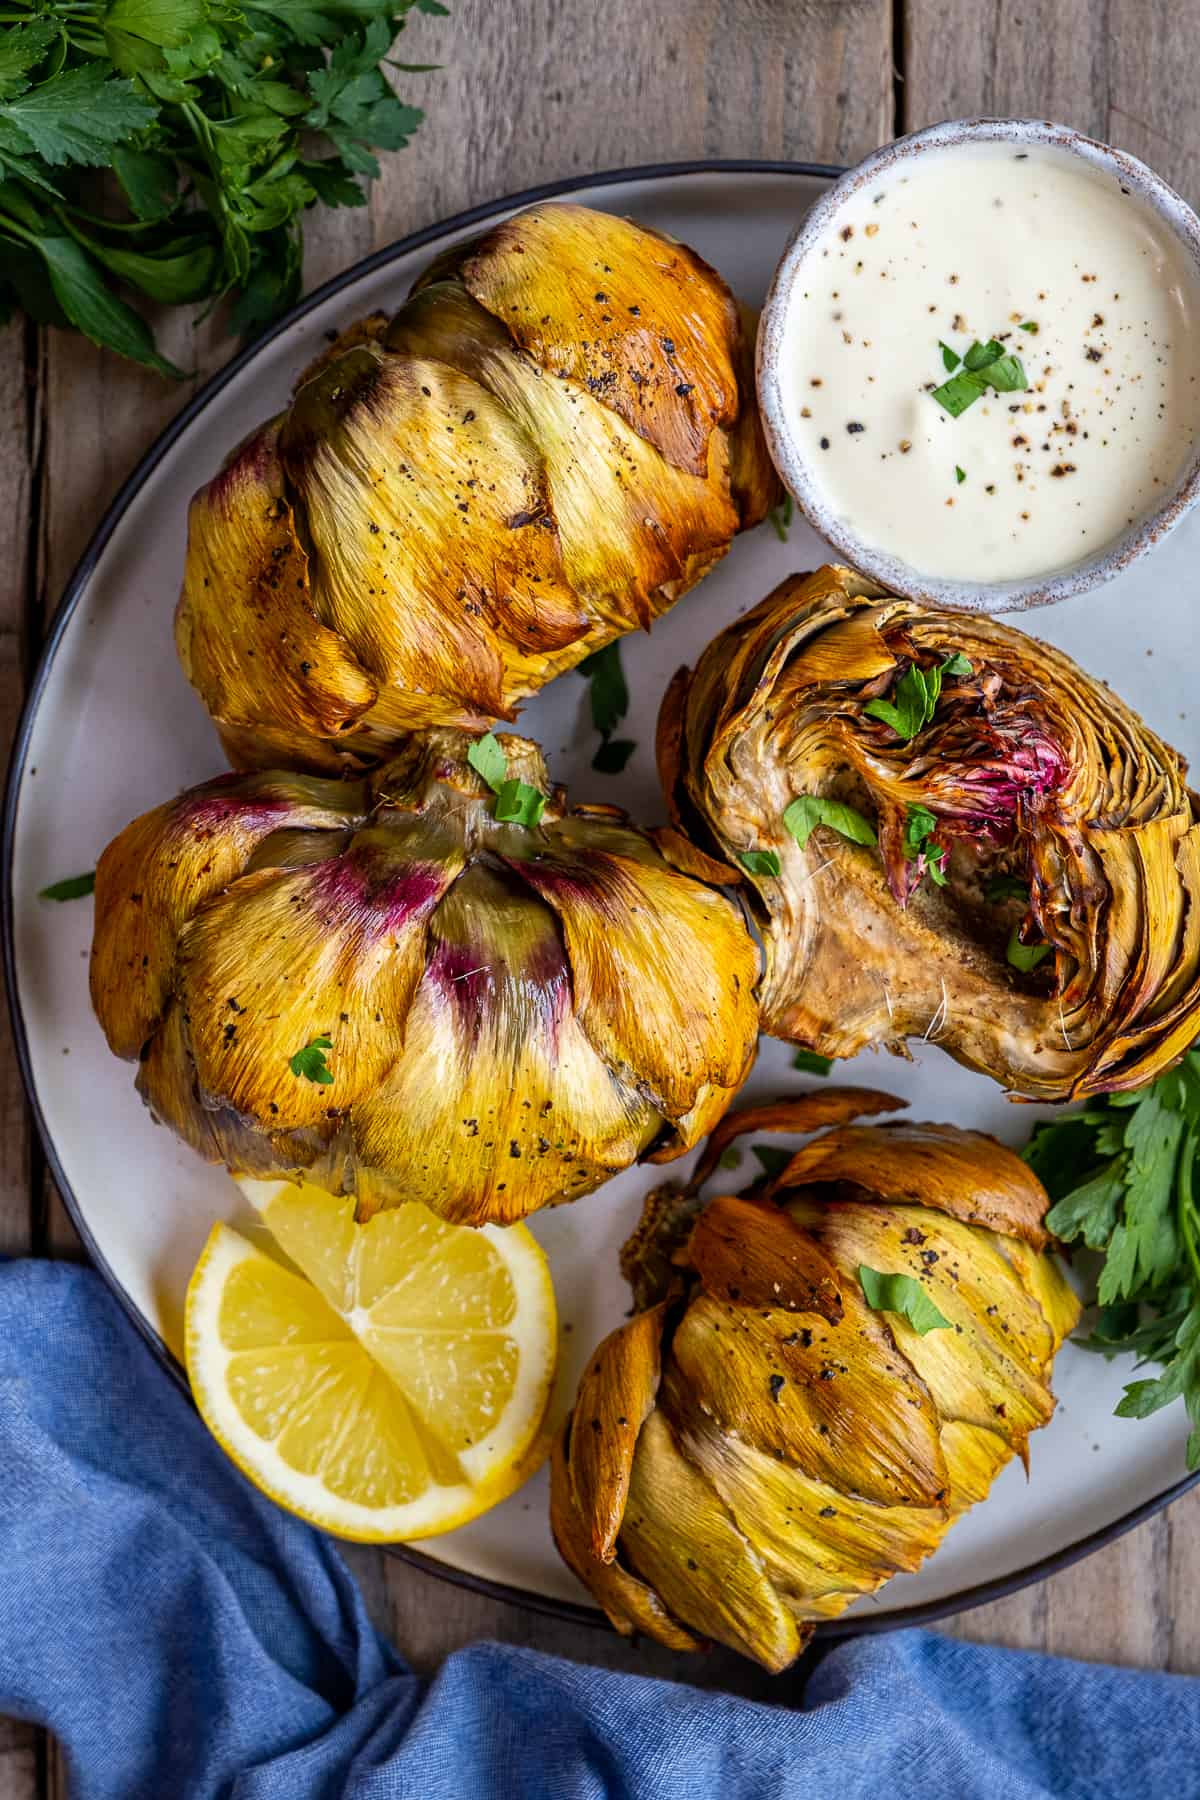 Air fried artichokes served with lemon slices and a dipping sauce on the side.